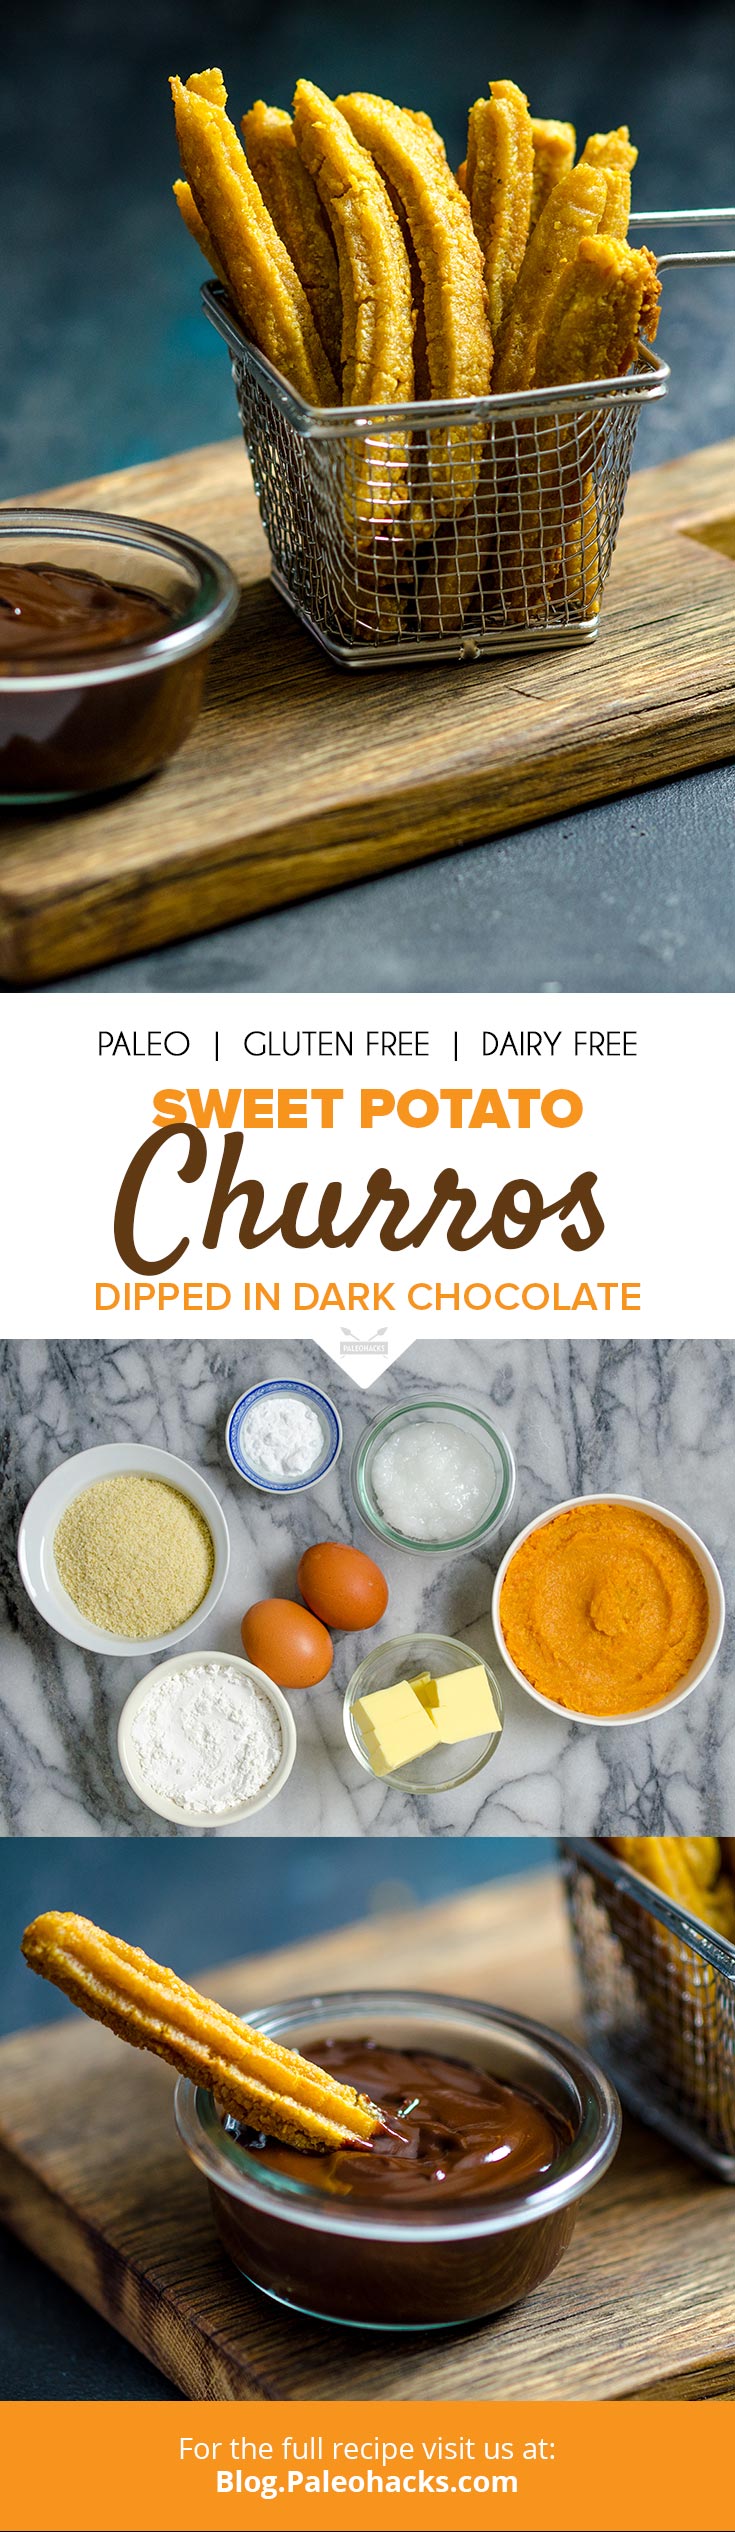 Bite into these crispy sweet potato churros dunked in a rich, dark chocolate sauce. These crunchy sweet potato churros are great for parties.